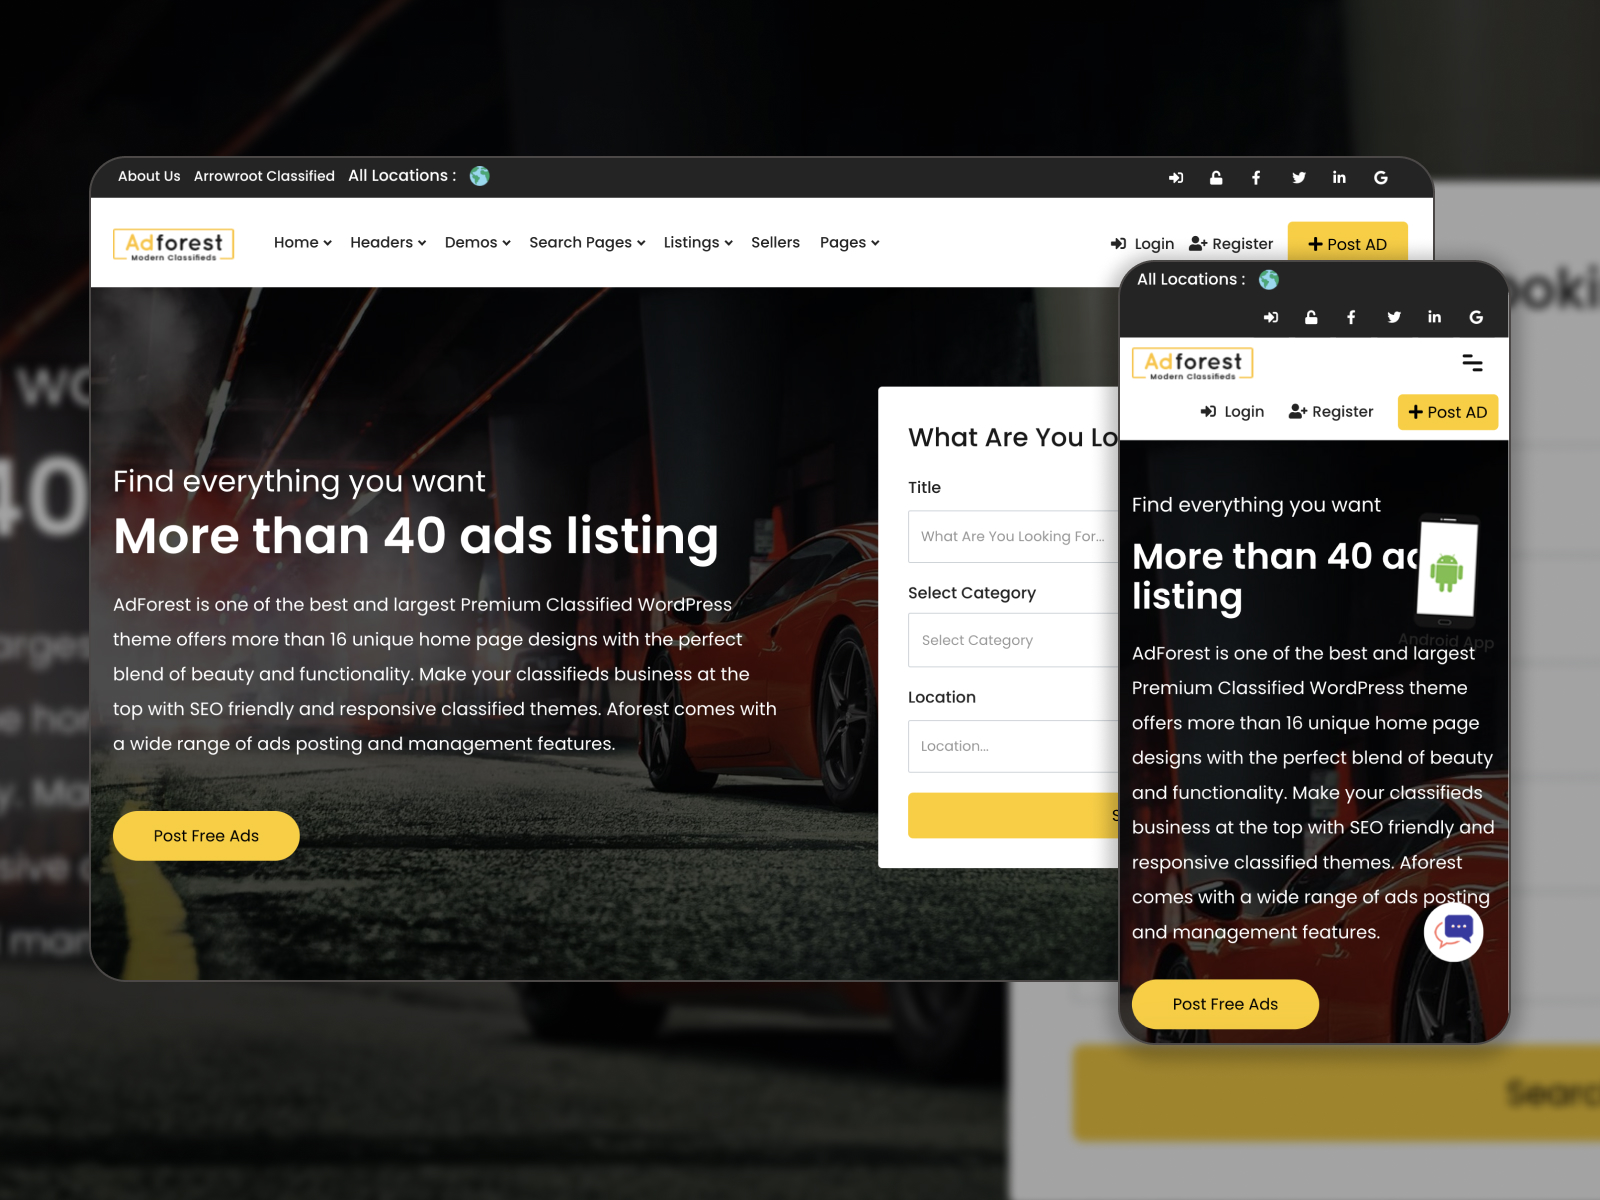 Illustration of AdForest - modern & multilingual theme for classifieds with monetization options in black, white, gold, and yellow pigment selection.